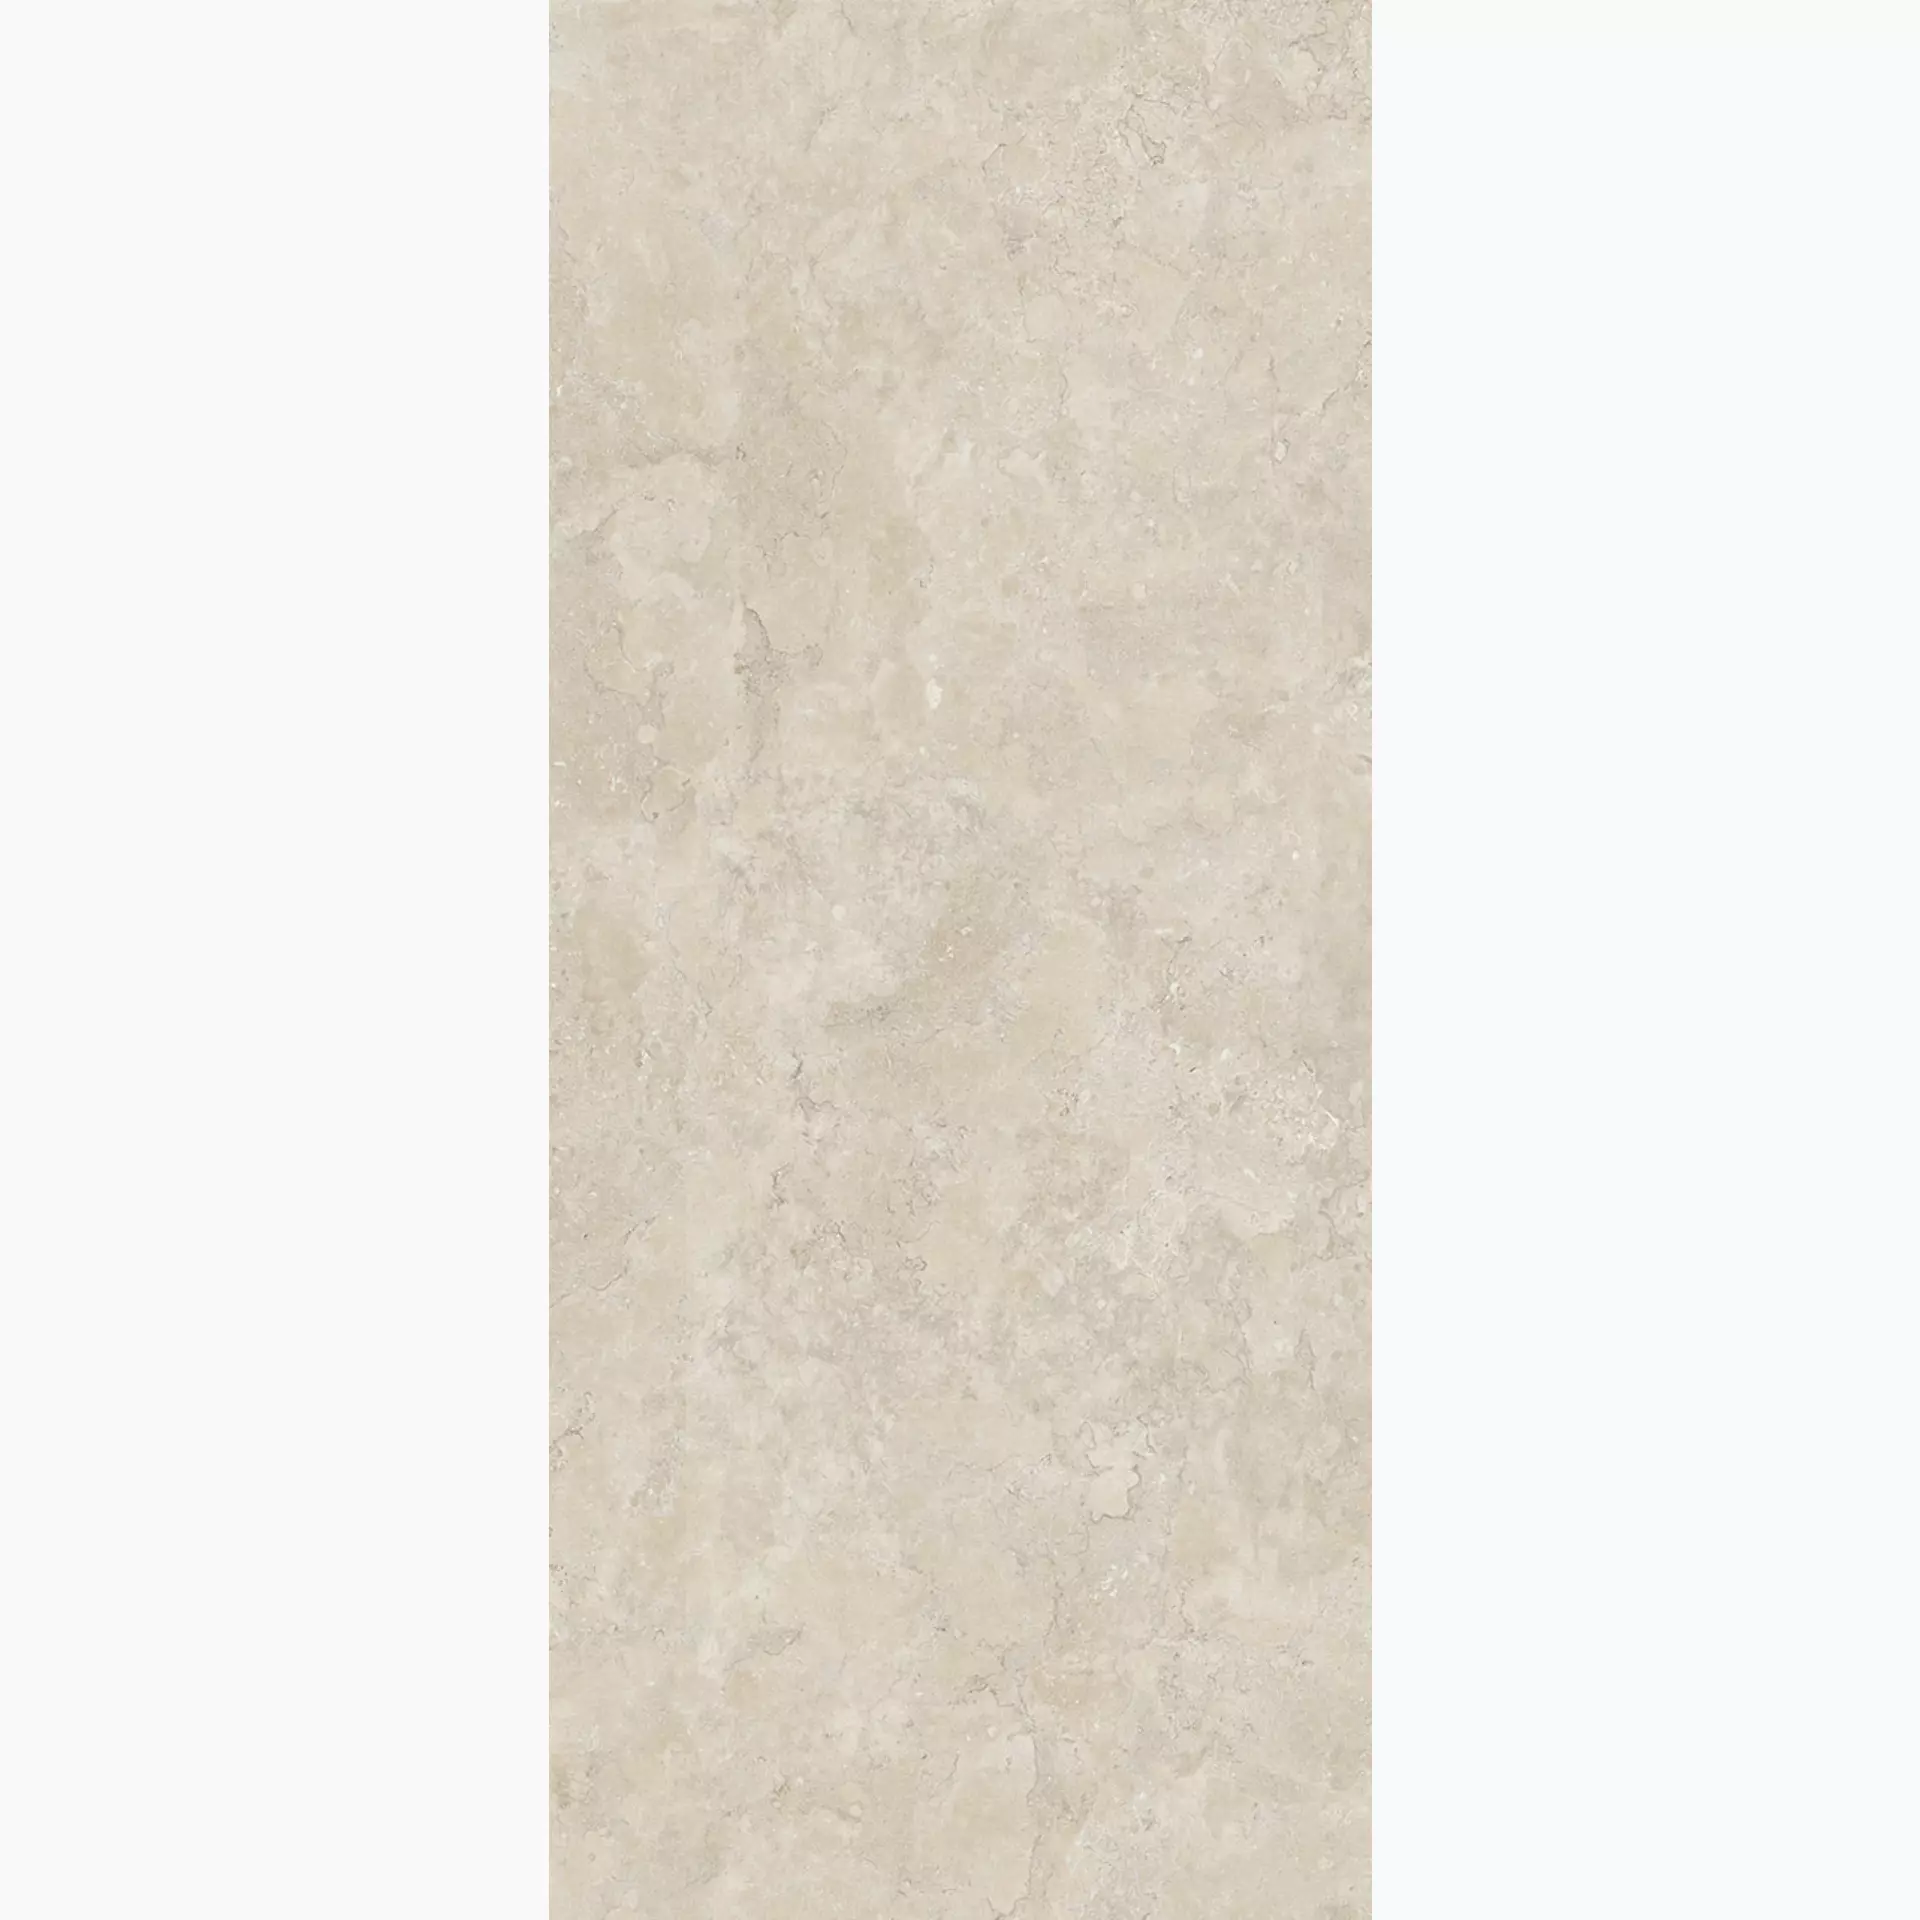 Coem Wide Gres Ivory Naturale Lagos 0OS121R 120x120cm rectified 6mm